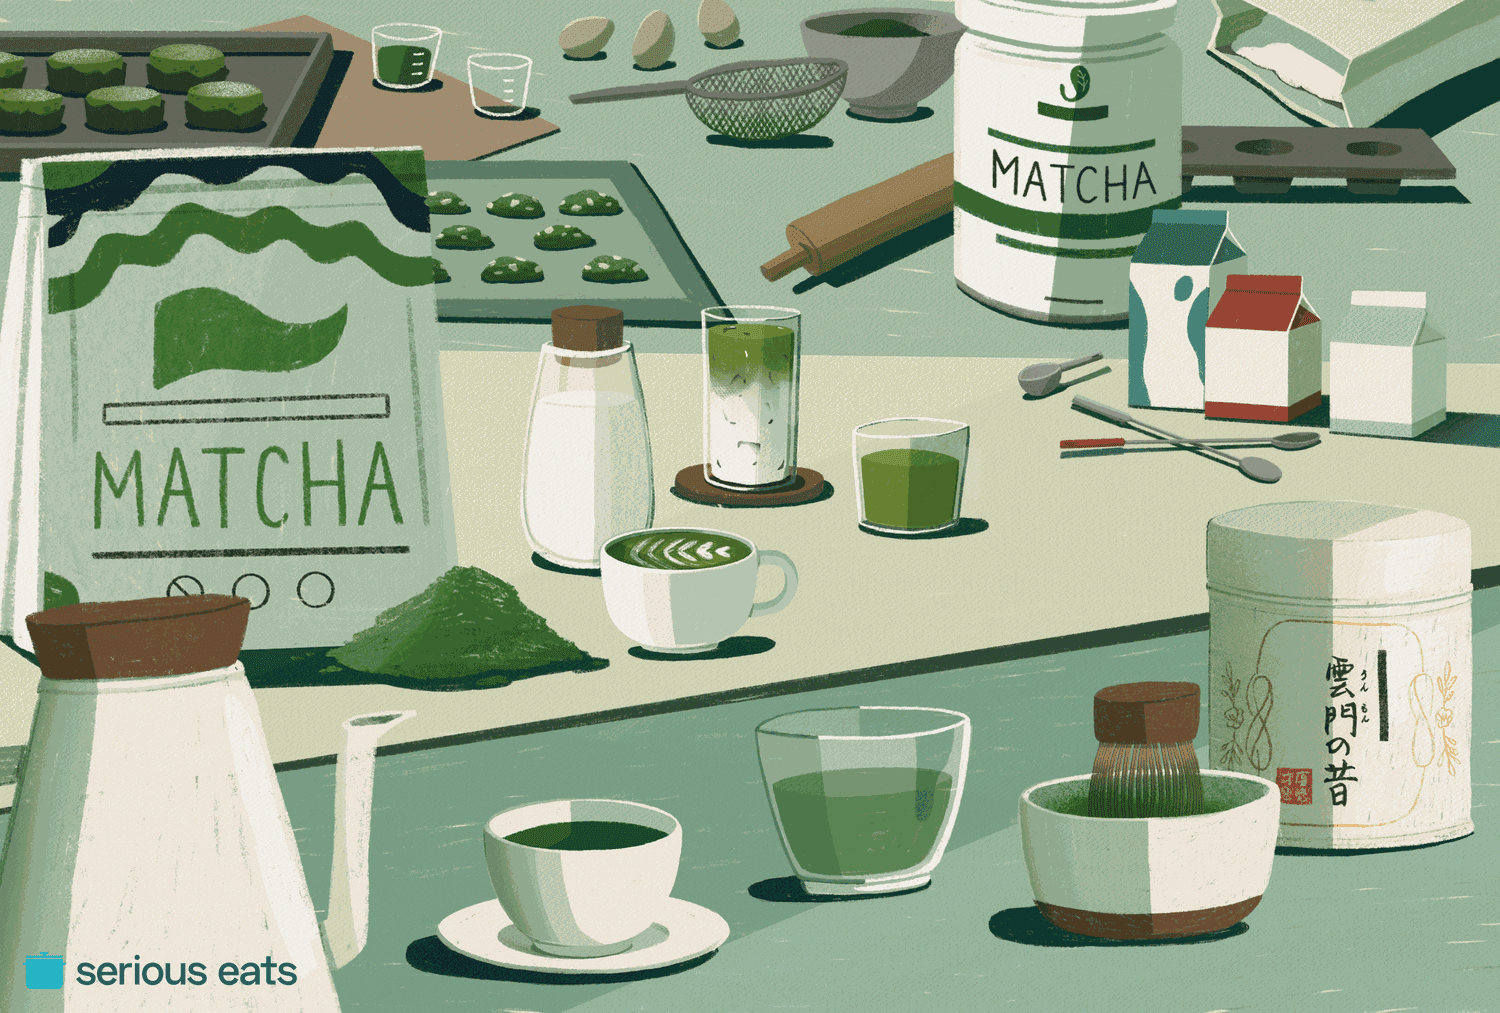 an illustration of matcha powder in tins and bags, with cups of brewed matcha, matcha baked goods, and a matcha latte.